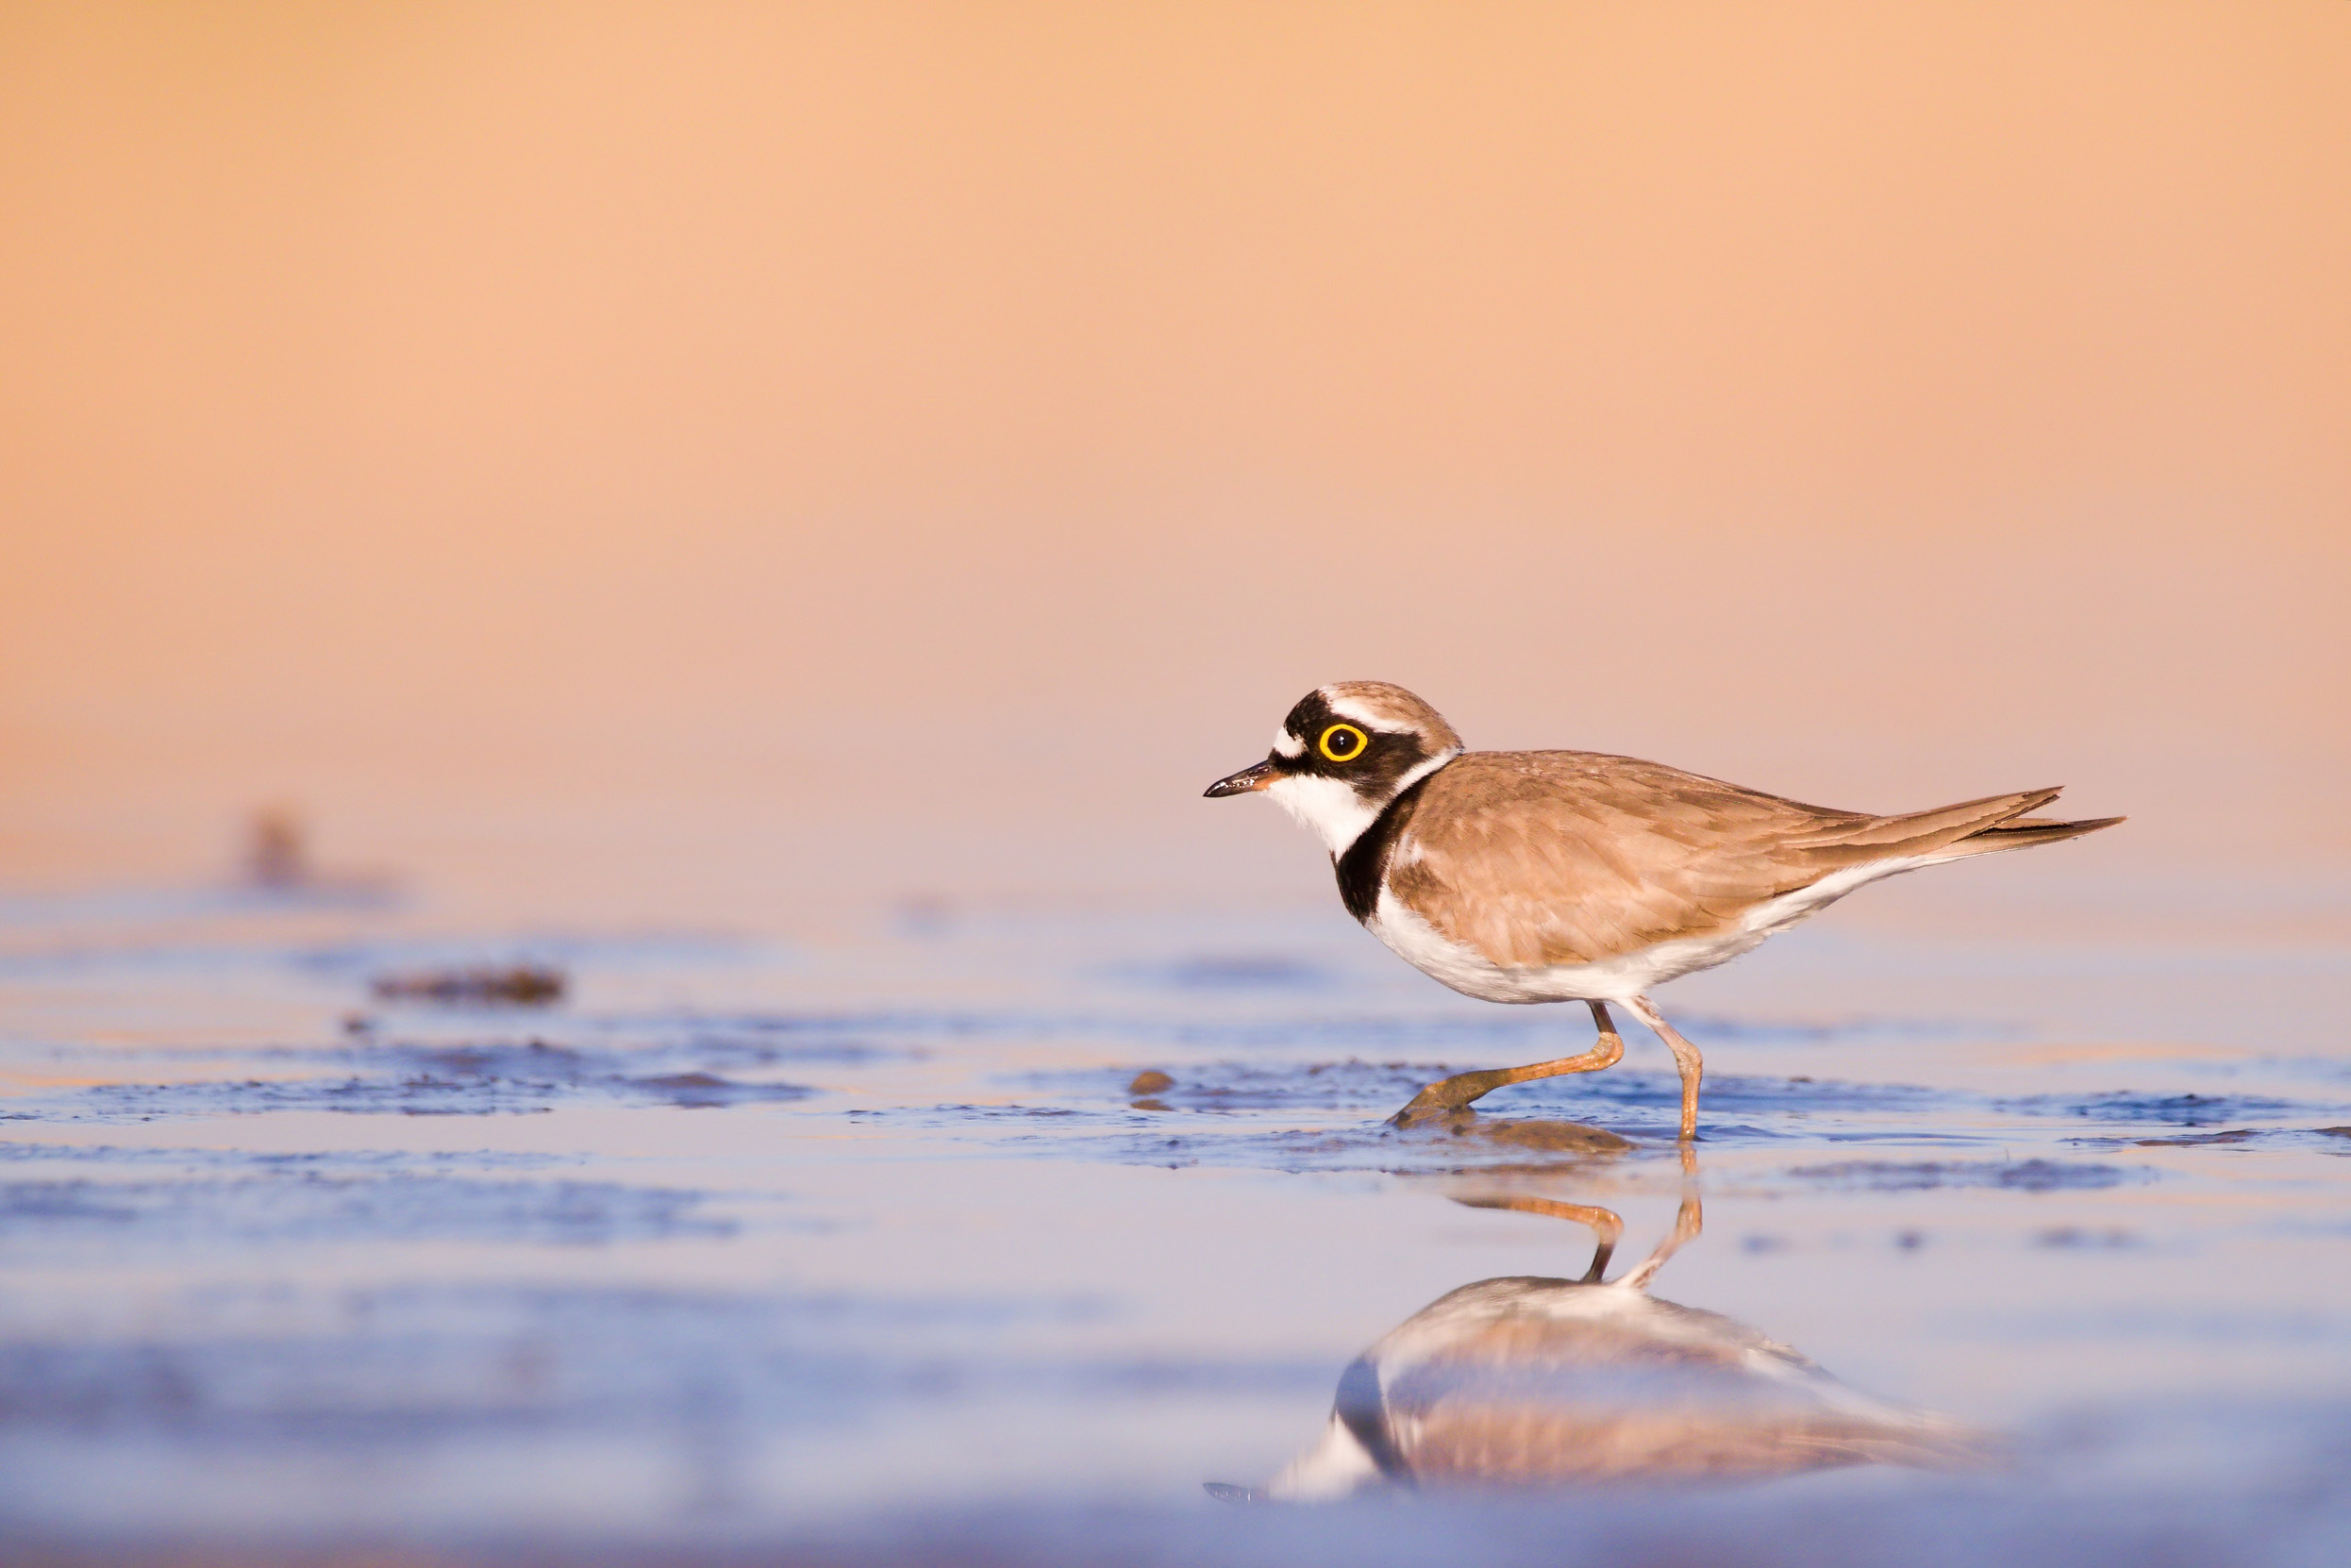 A Little Ringed Plover walking in small pools of water on a beach at sunrise.